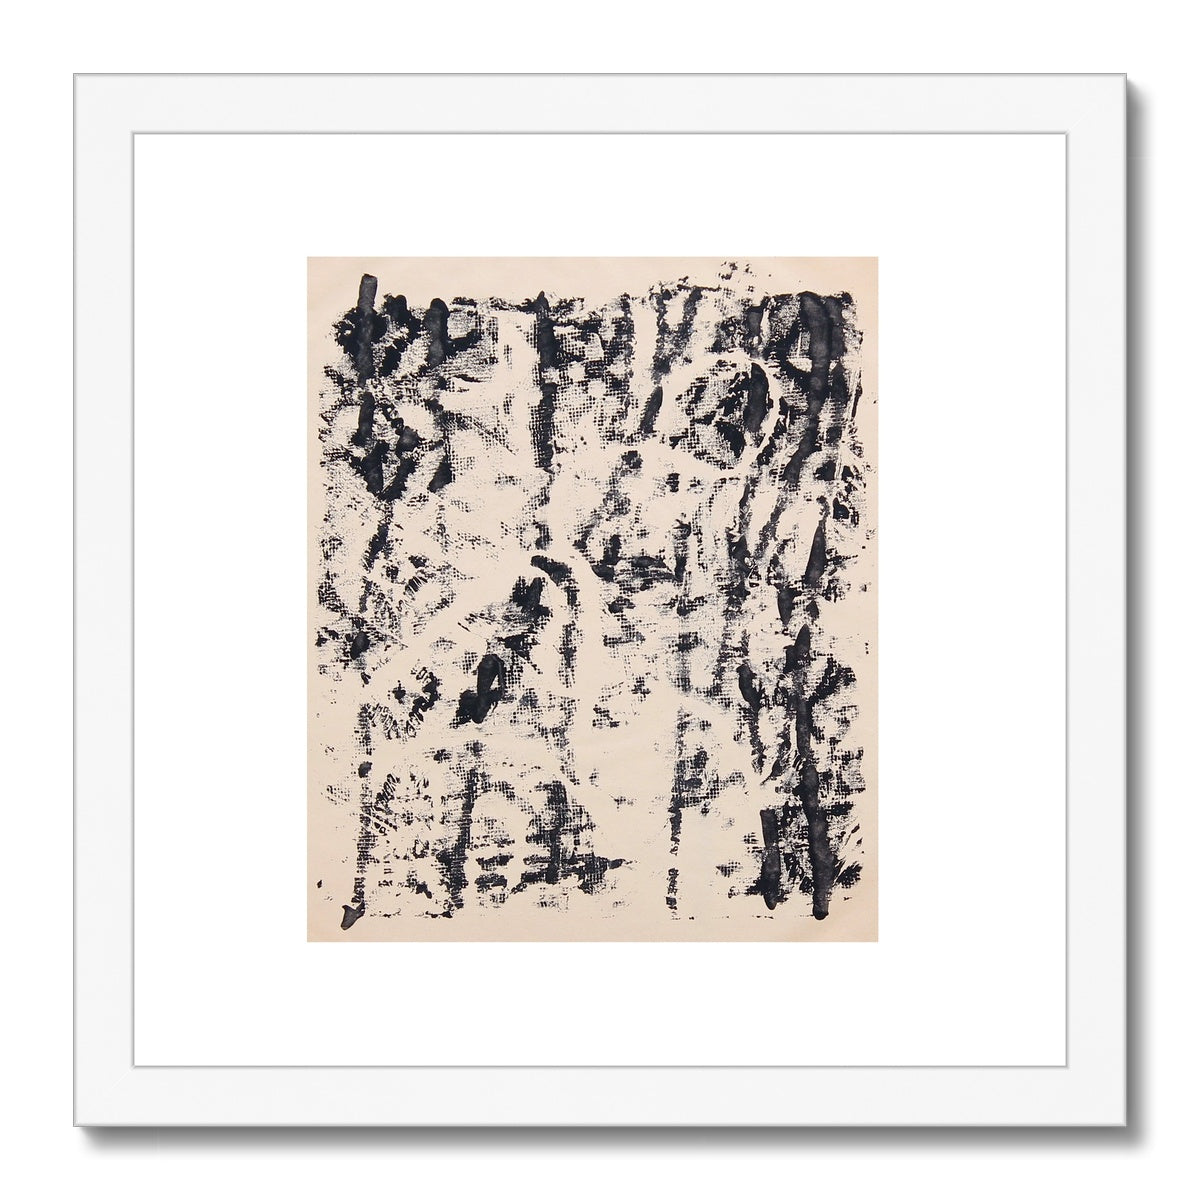 Inhale and exhale 12, Framed & Mounted Print